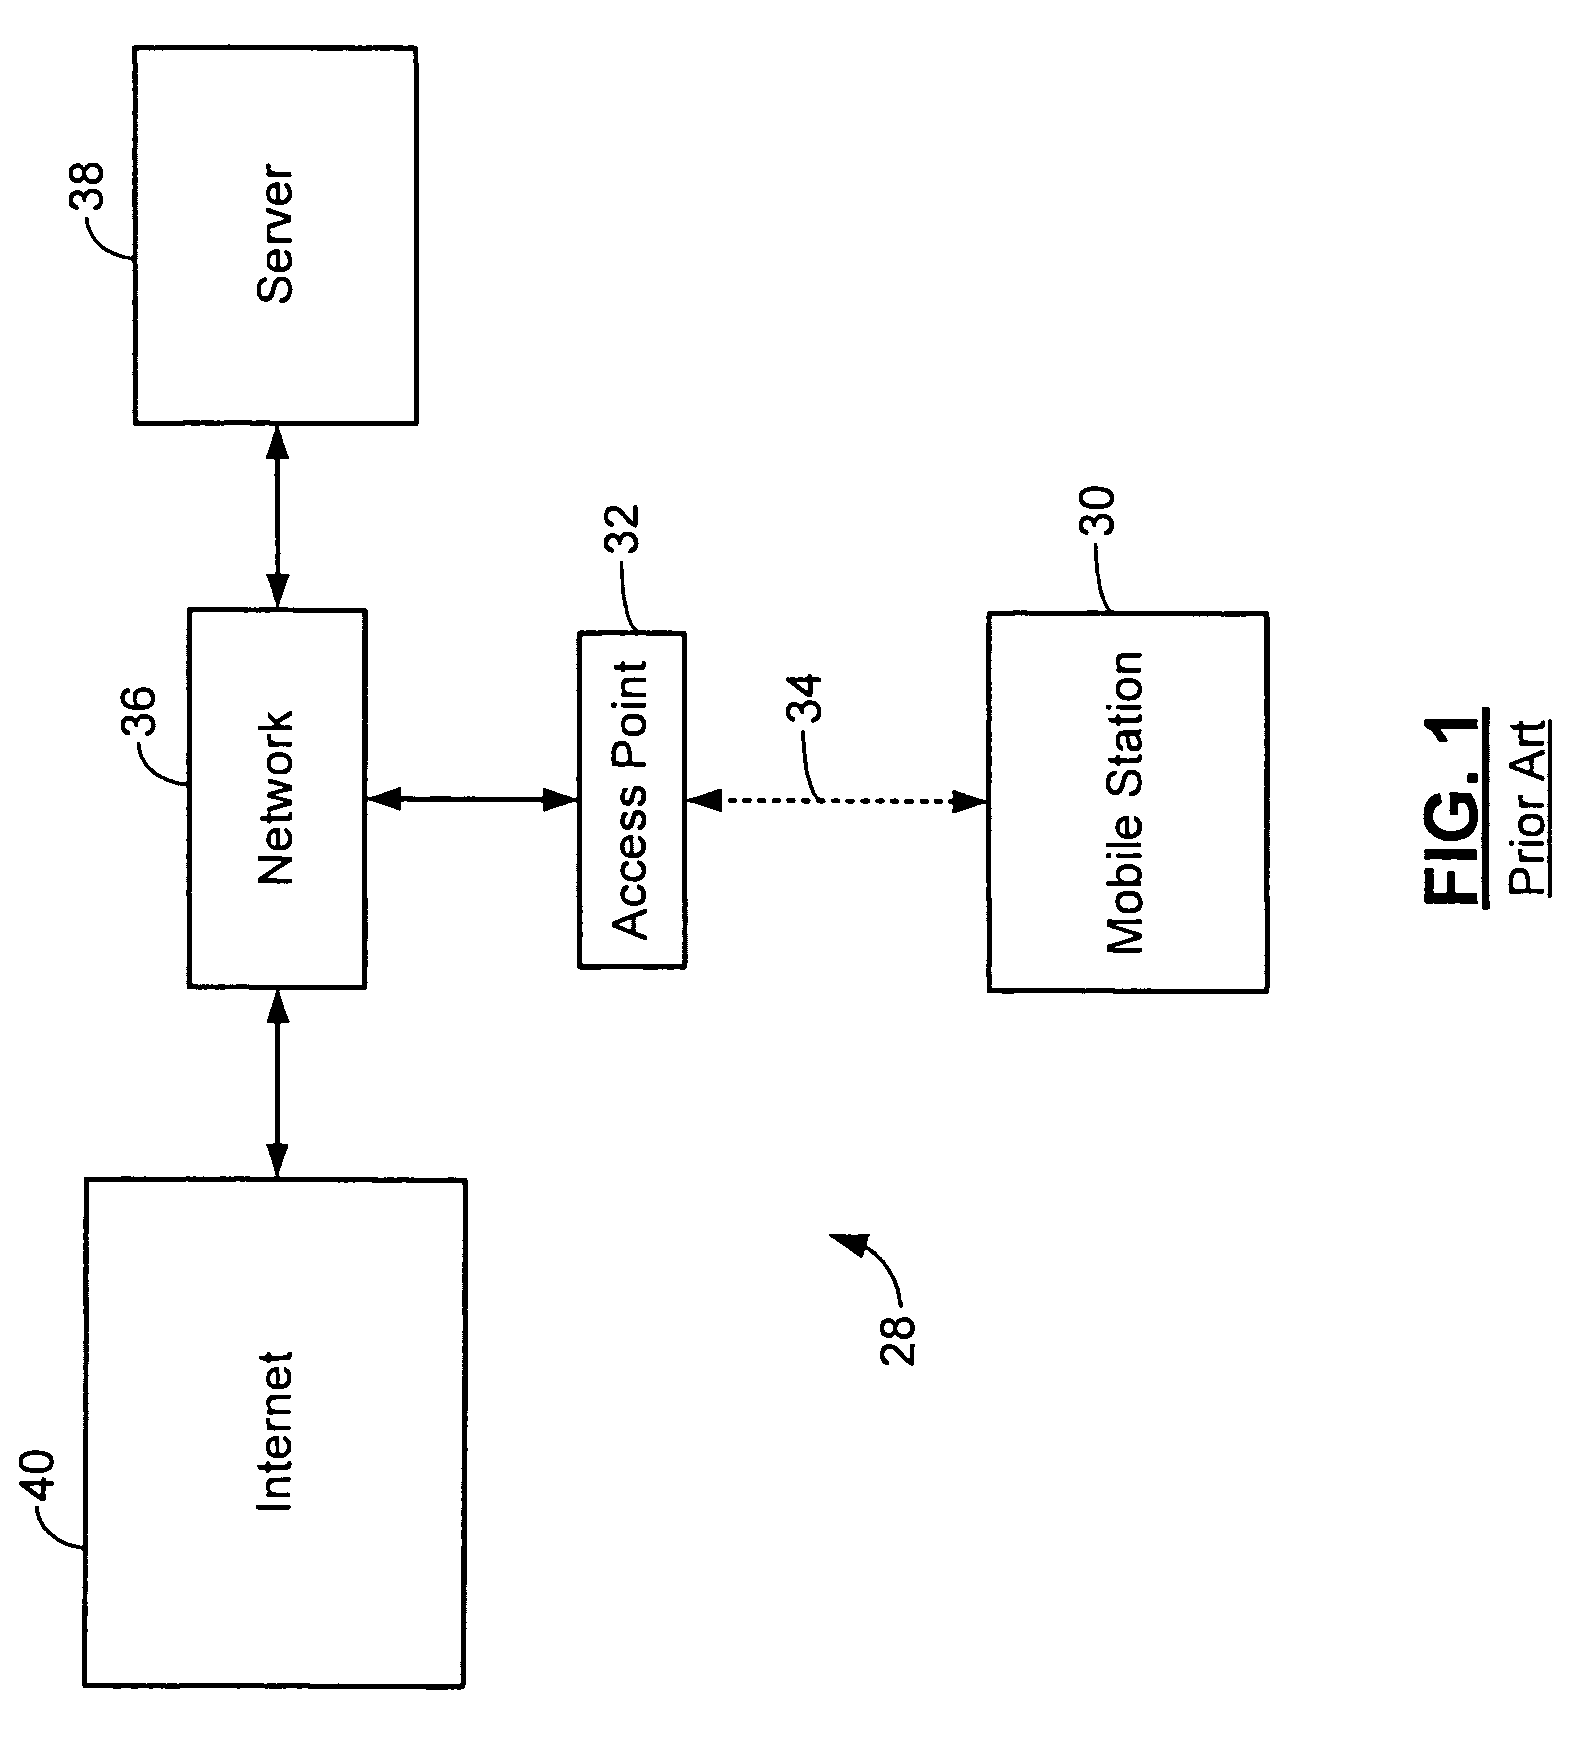 Power savings apparatus and method for wireless network devices